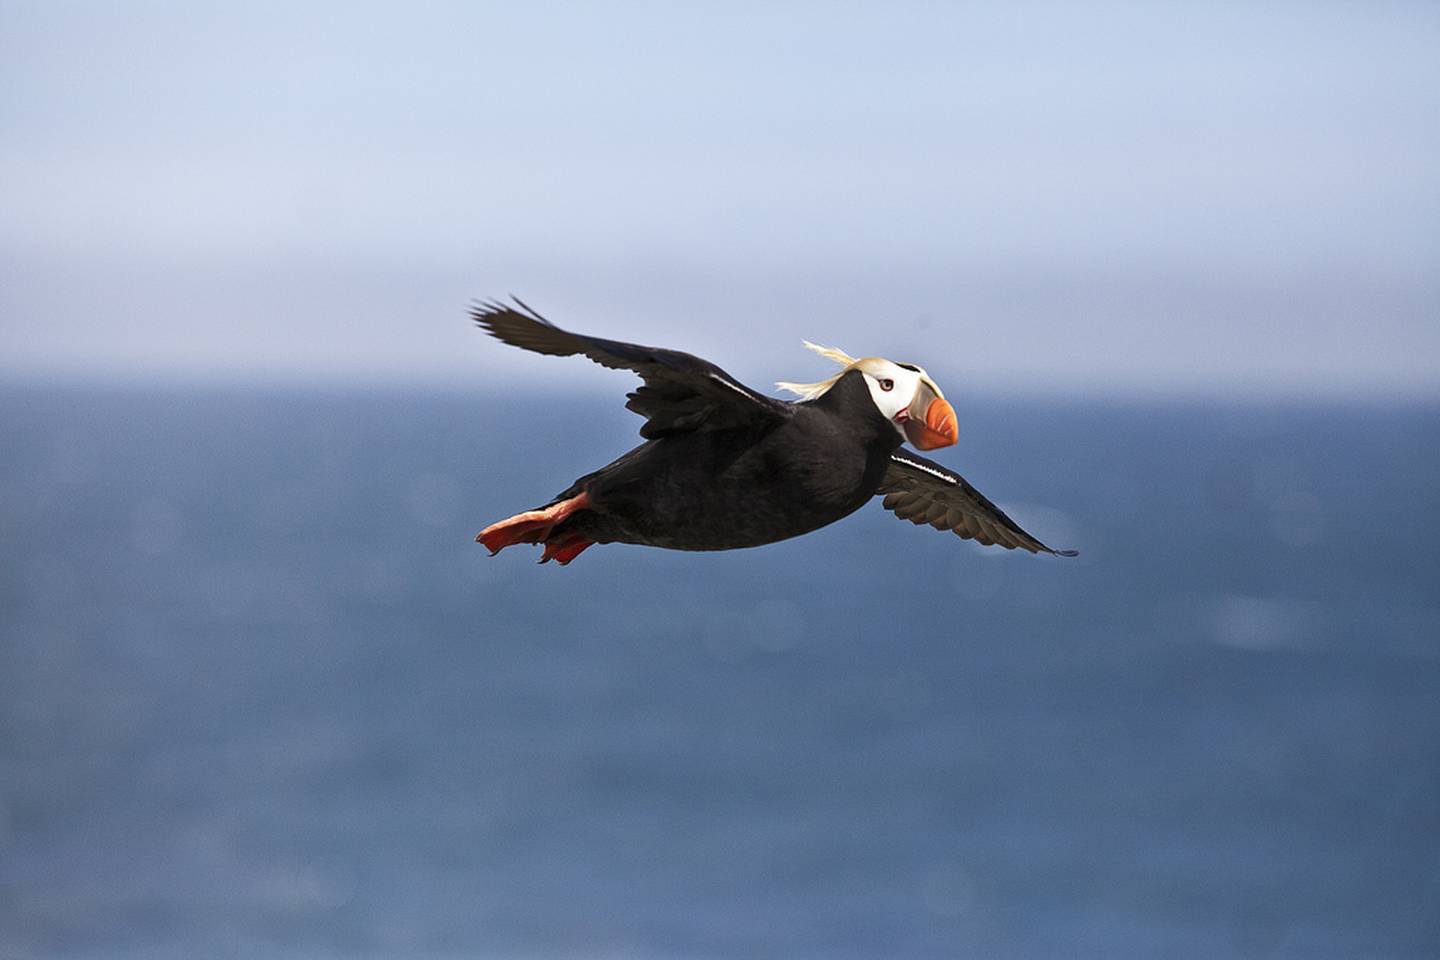 A tufted puffin in flight above Bogoslof Island in the Bering Sea